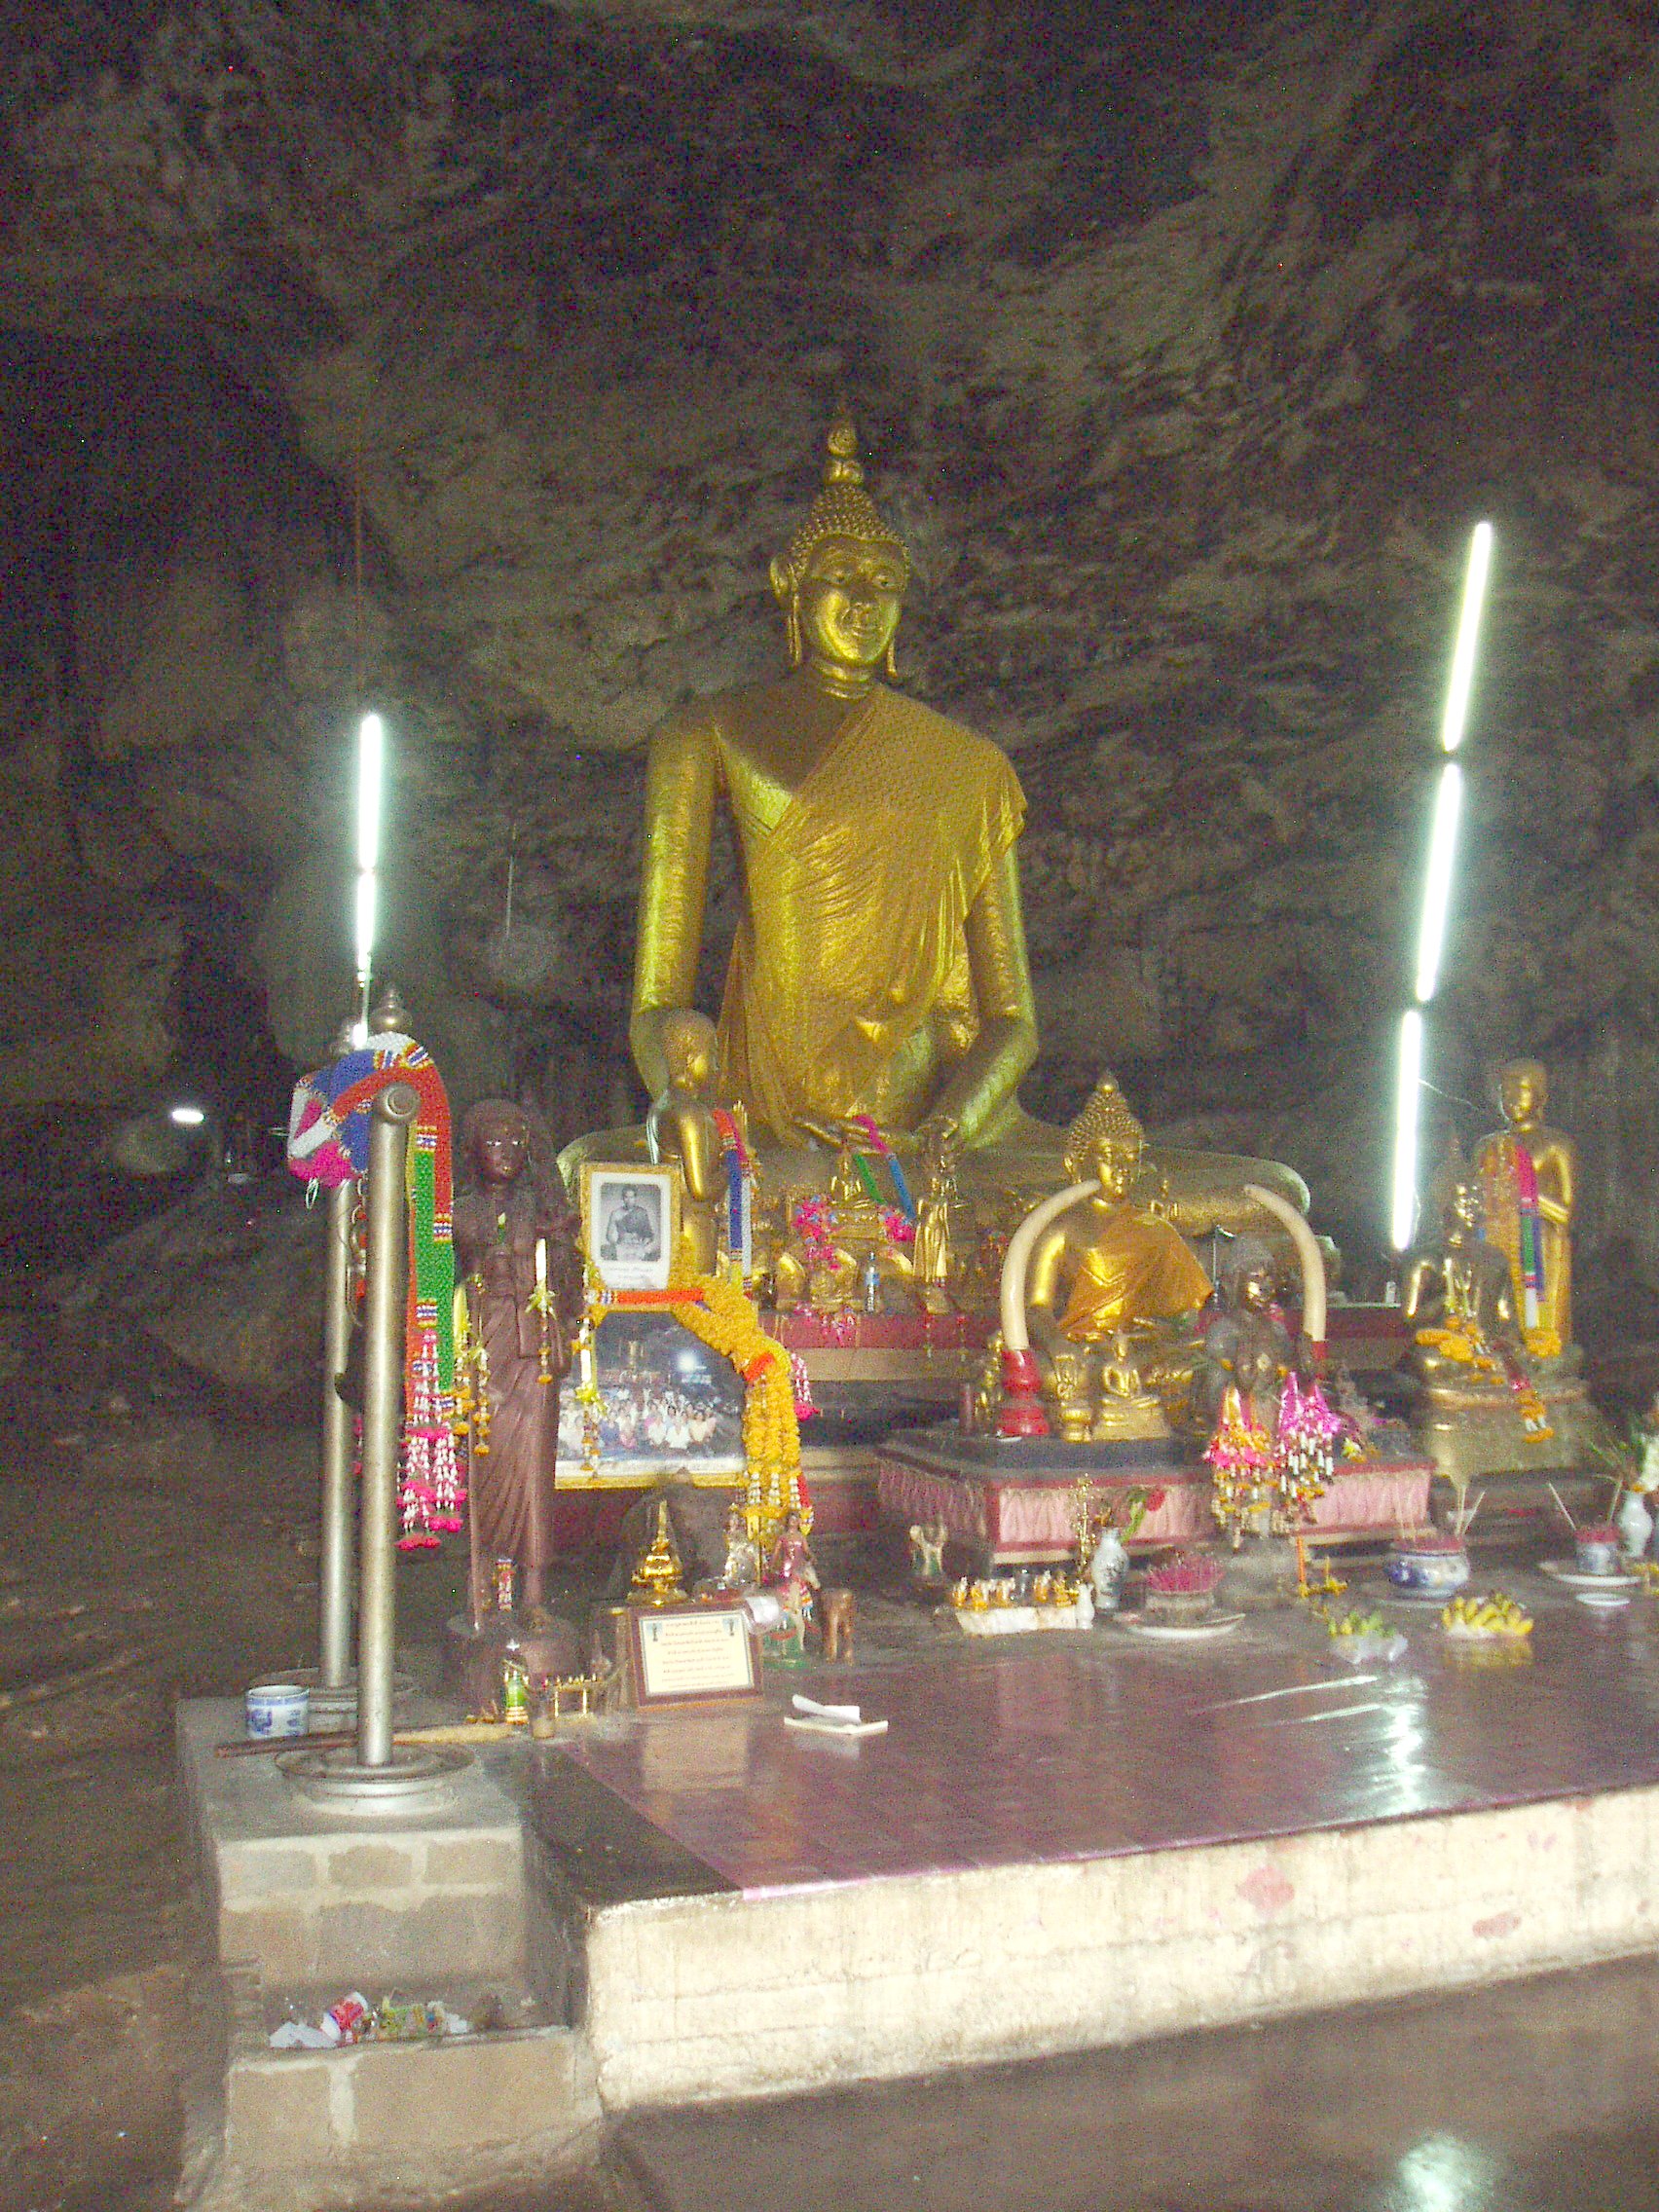 Cave Shrine, Thailand Cave shrine next to the Burma railway, containing a gilded Buddha image (sadly his head was a little too small!).